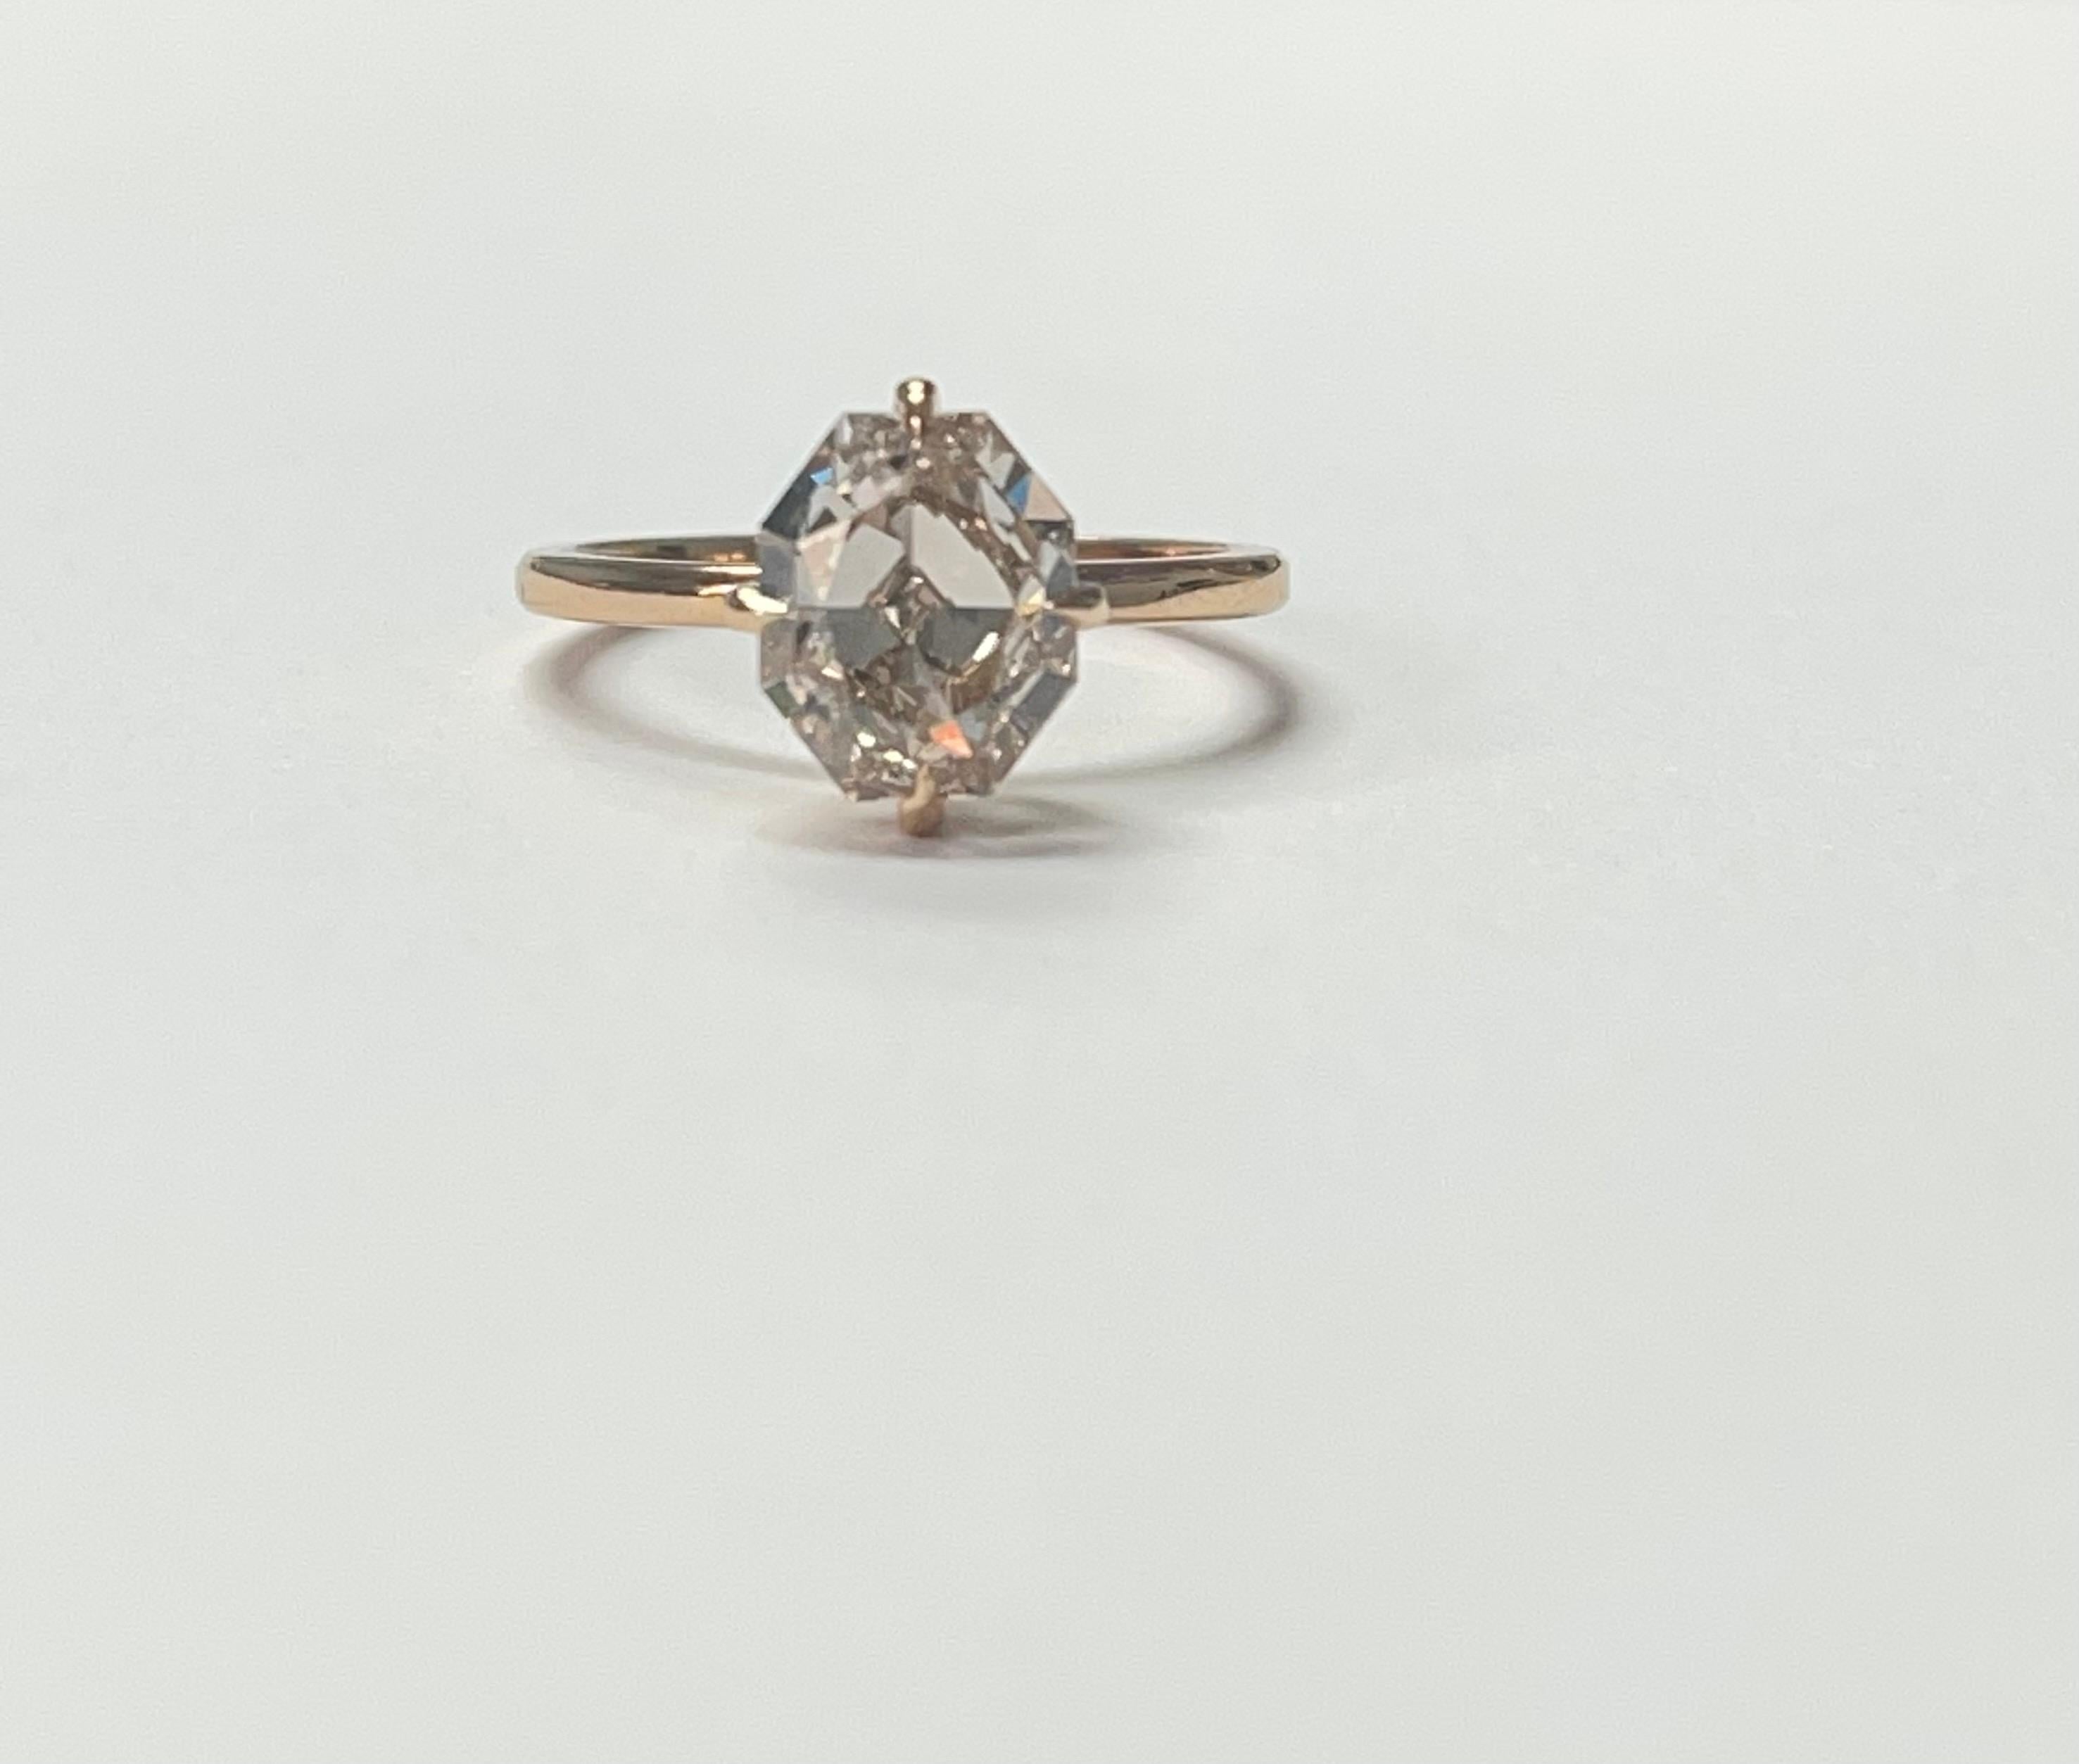 Fancy Light Pinkish Brown Octagonal Diamond Engagement Ring in Rose Gold, GIA For Sale 2